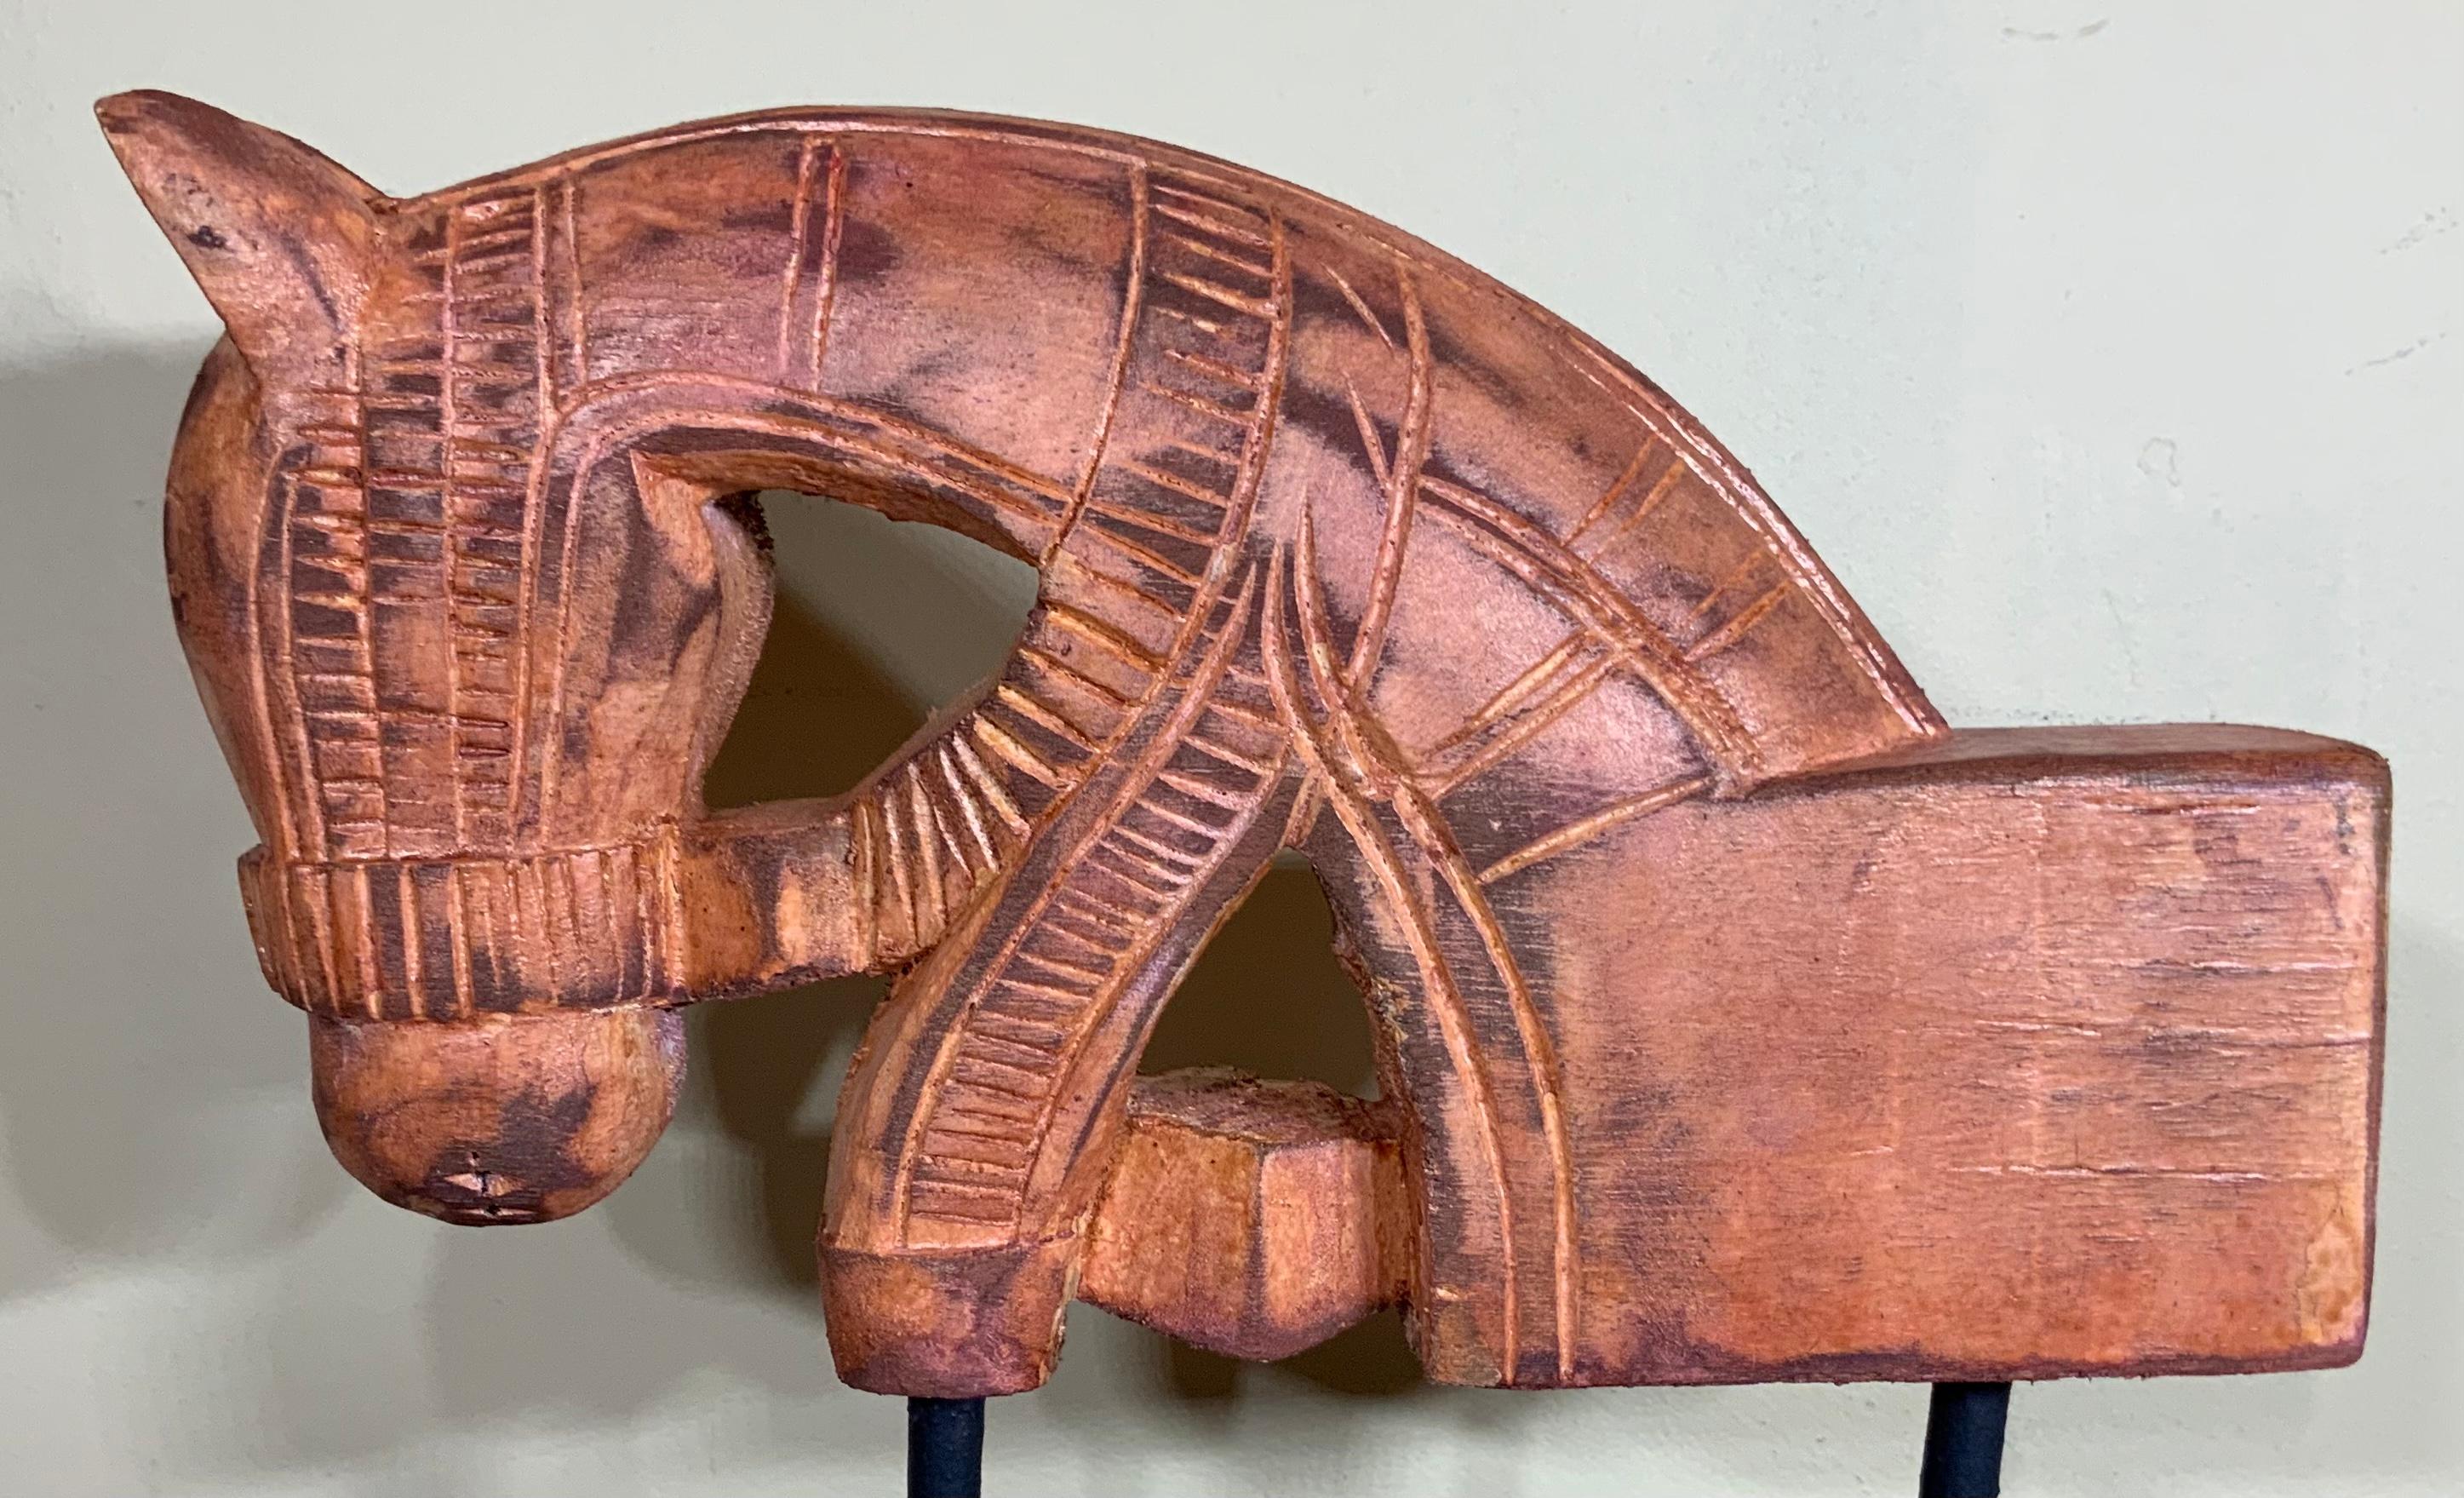 Horse sculpture made of hand carved solid wood, nice carving details, hand painted with beautiful rustic patina.
Professionally mounted on wood base. Exceptional object of art for display.